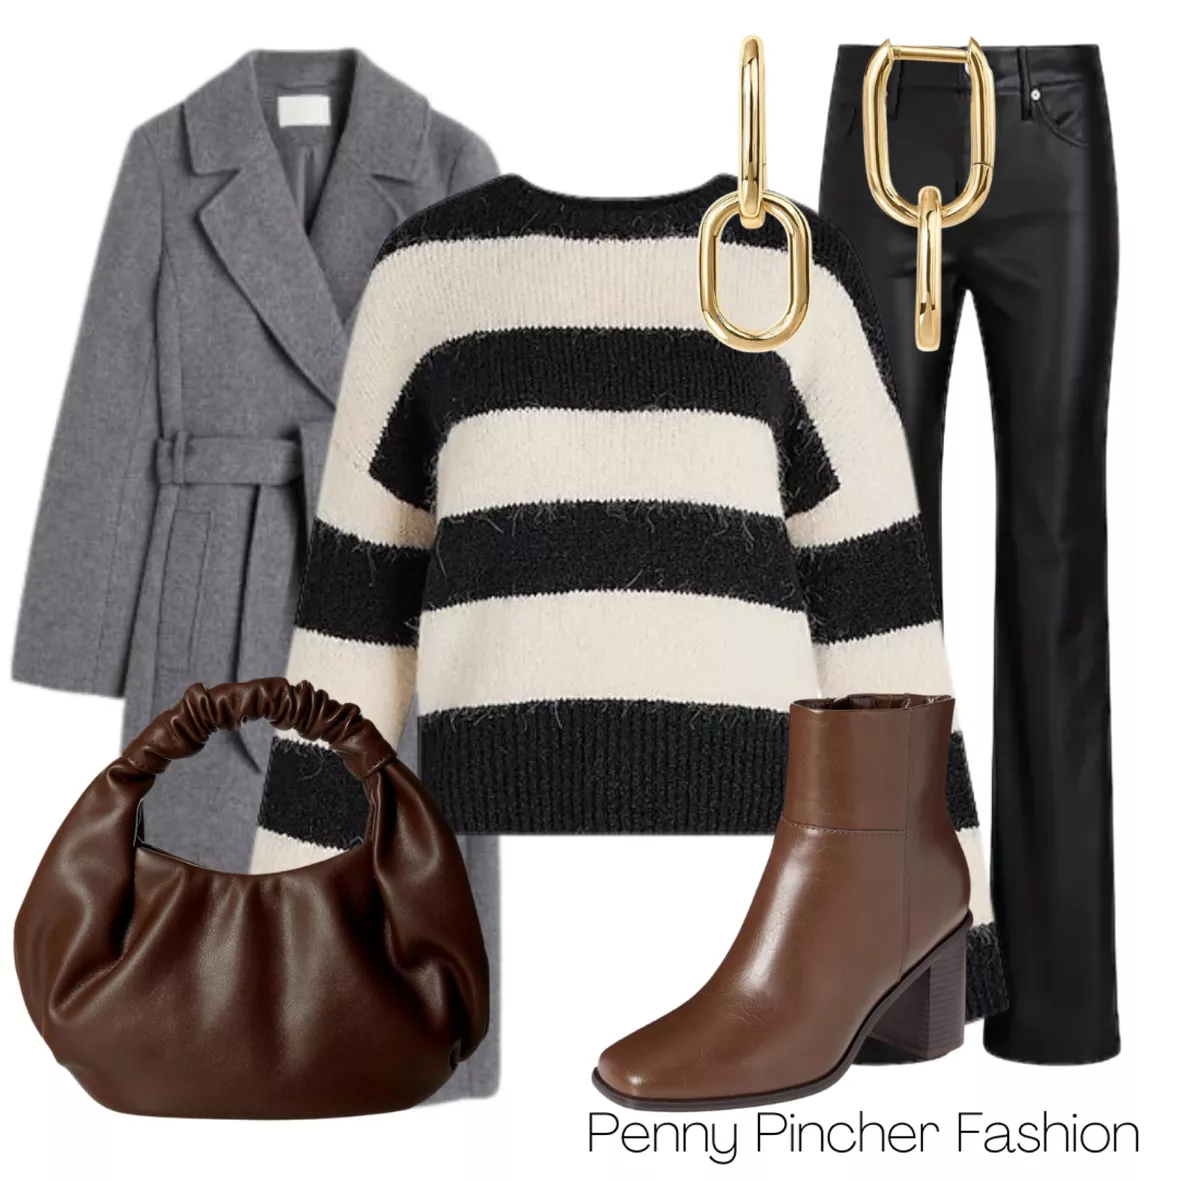 3 Classic Fall Outfit Pairings - Penny Pincher Fashion